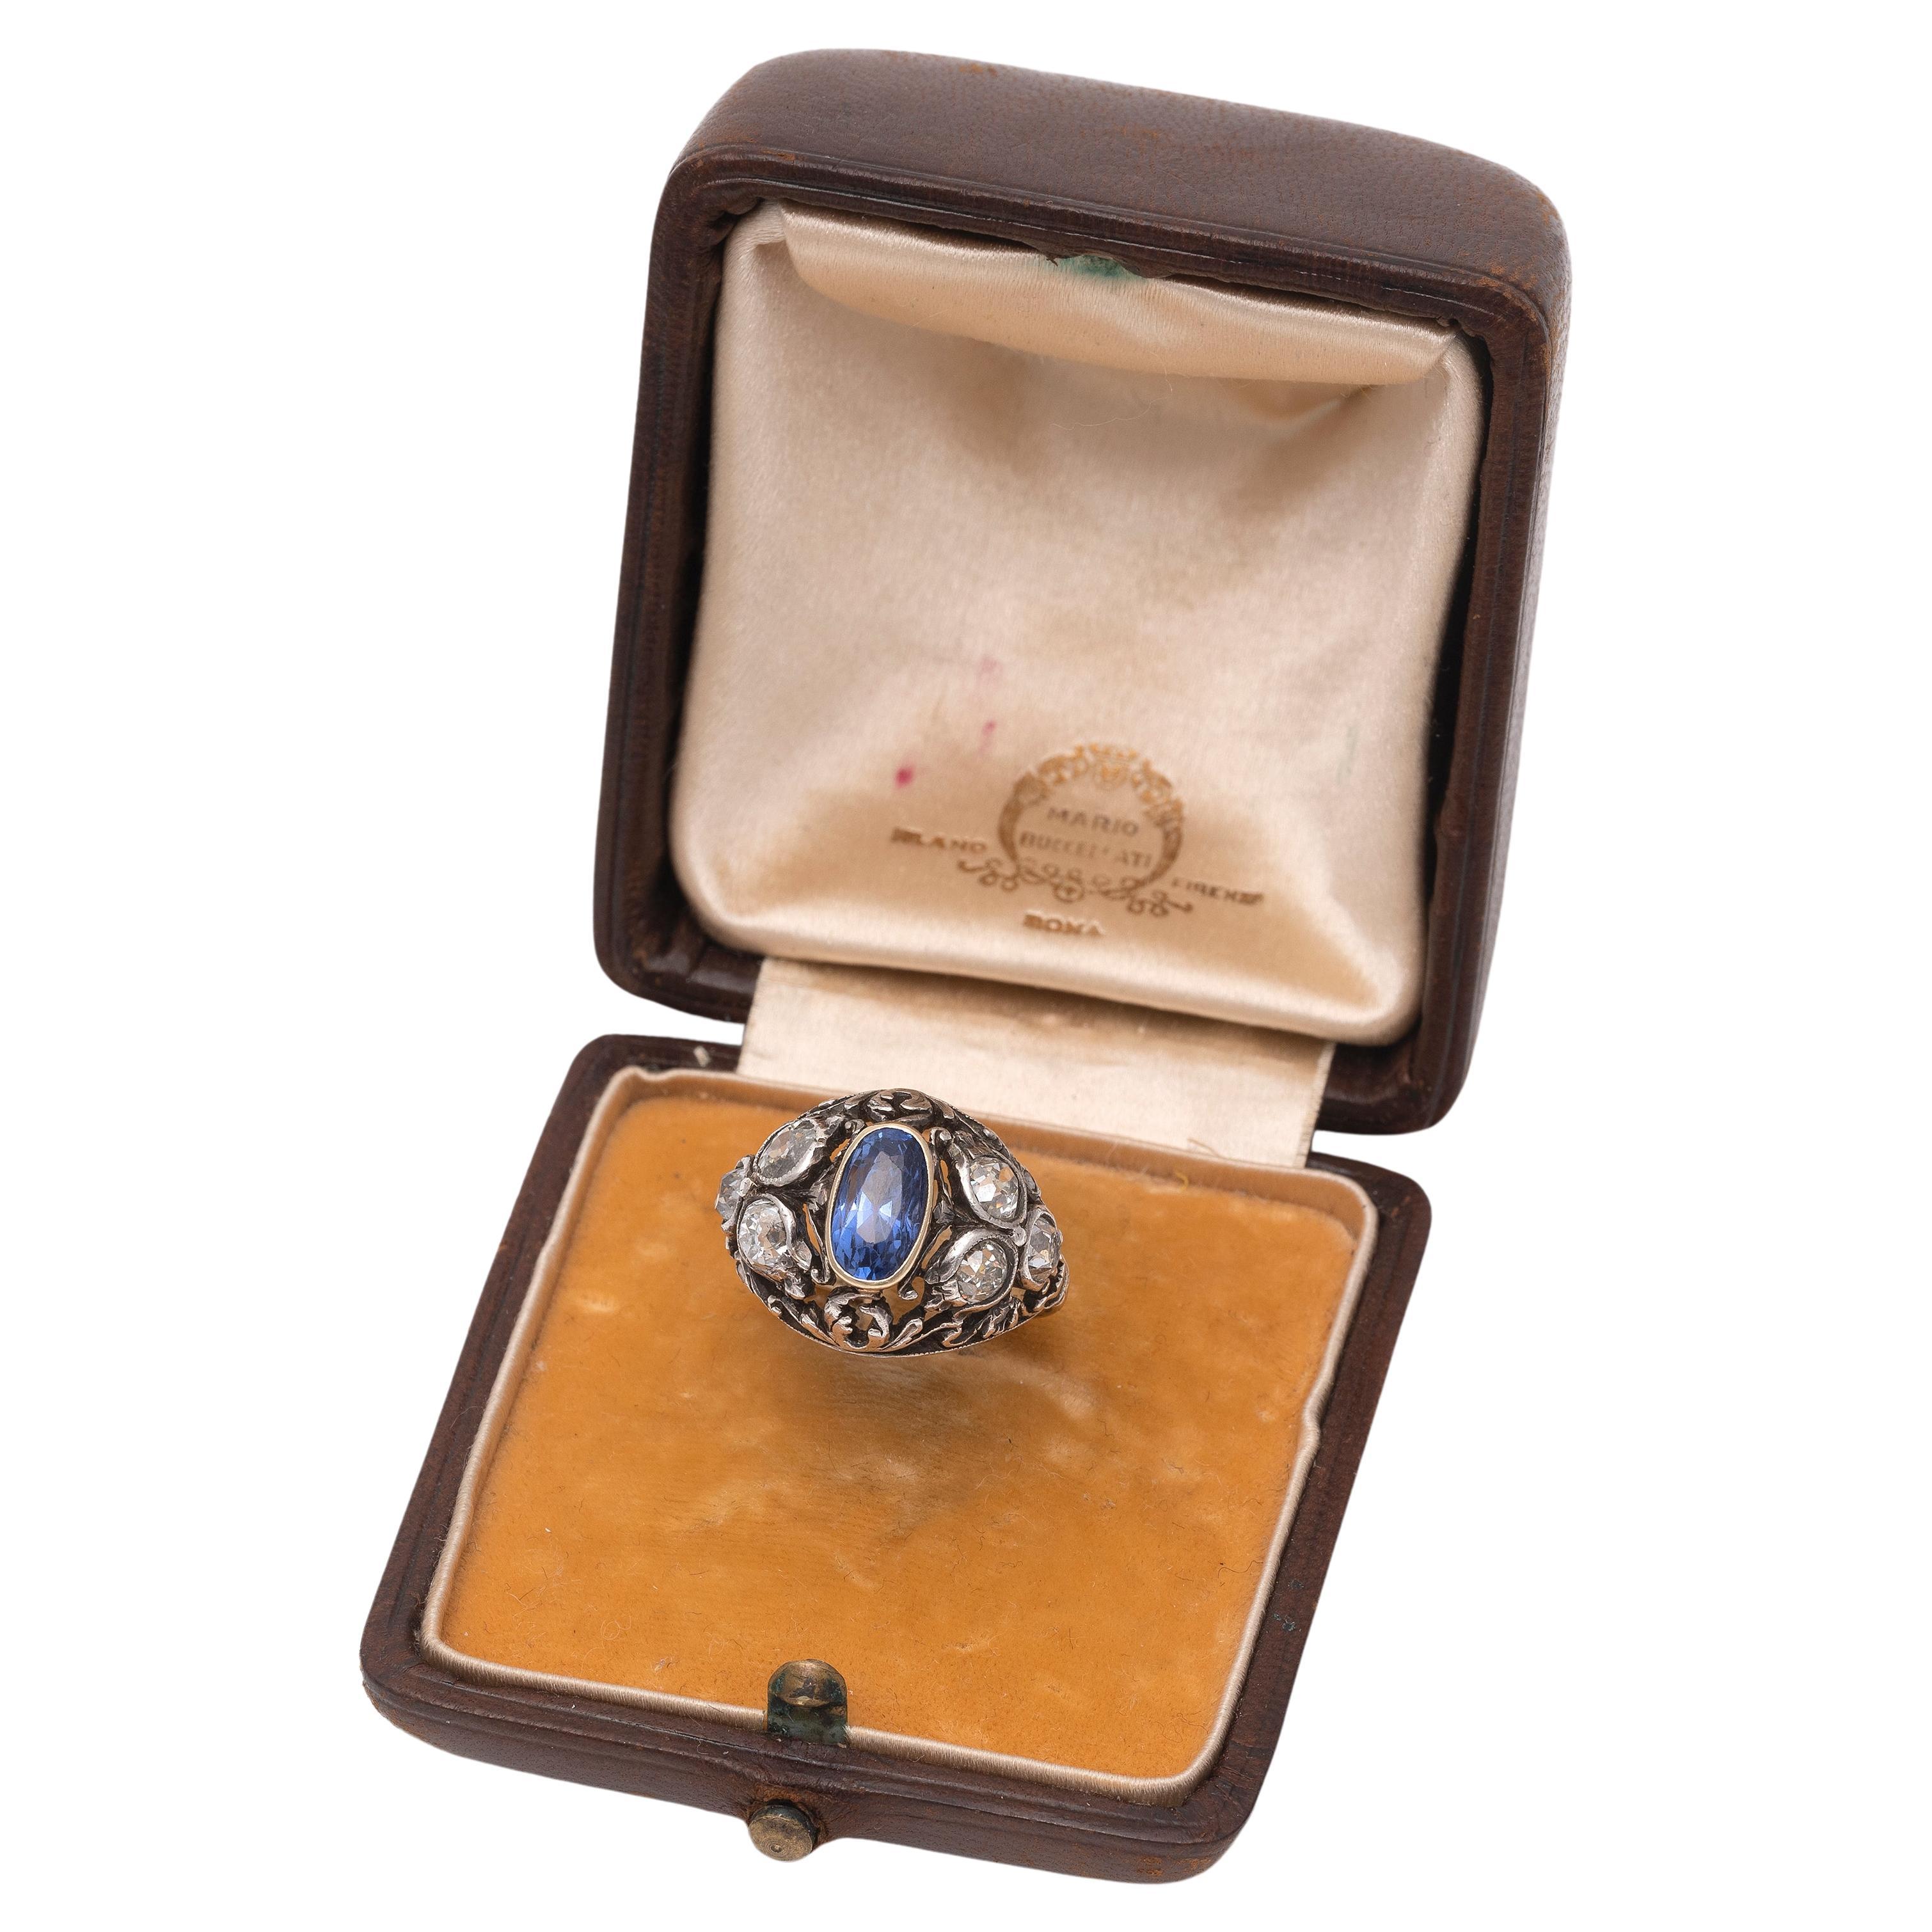 In gold and silver, with openwork motif depicting vines, embellished in the center with an oval-cut sapphire weighing approximately 1.90 ct, flanked by old-cut diamonds weighing approximately 1.50 ct, signed 